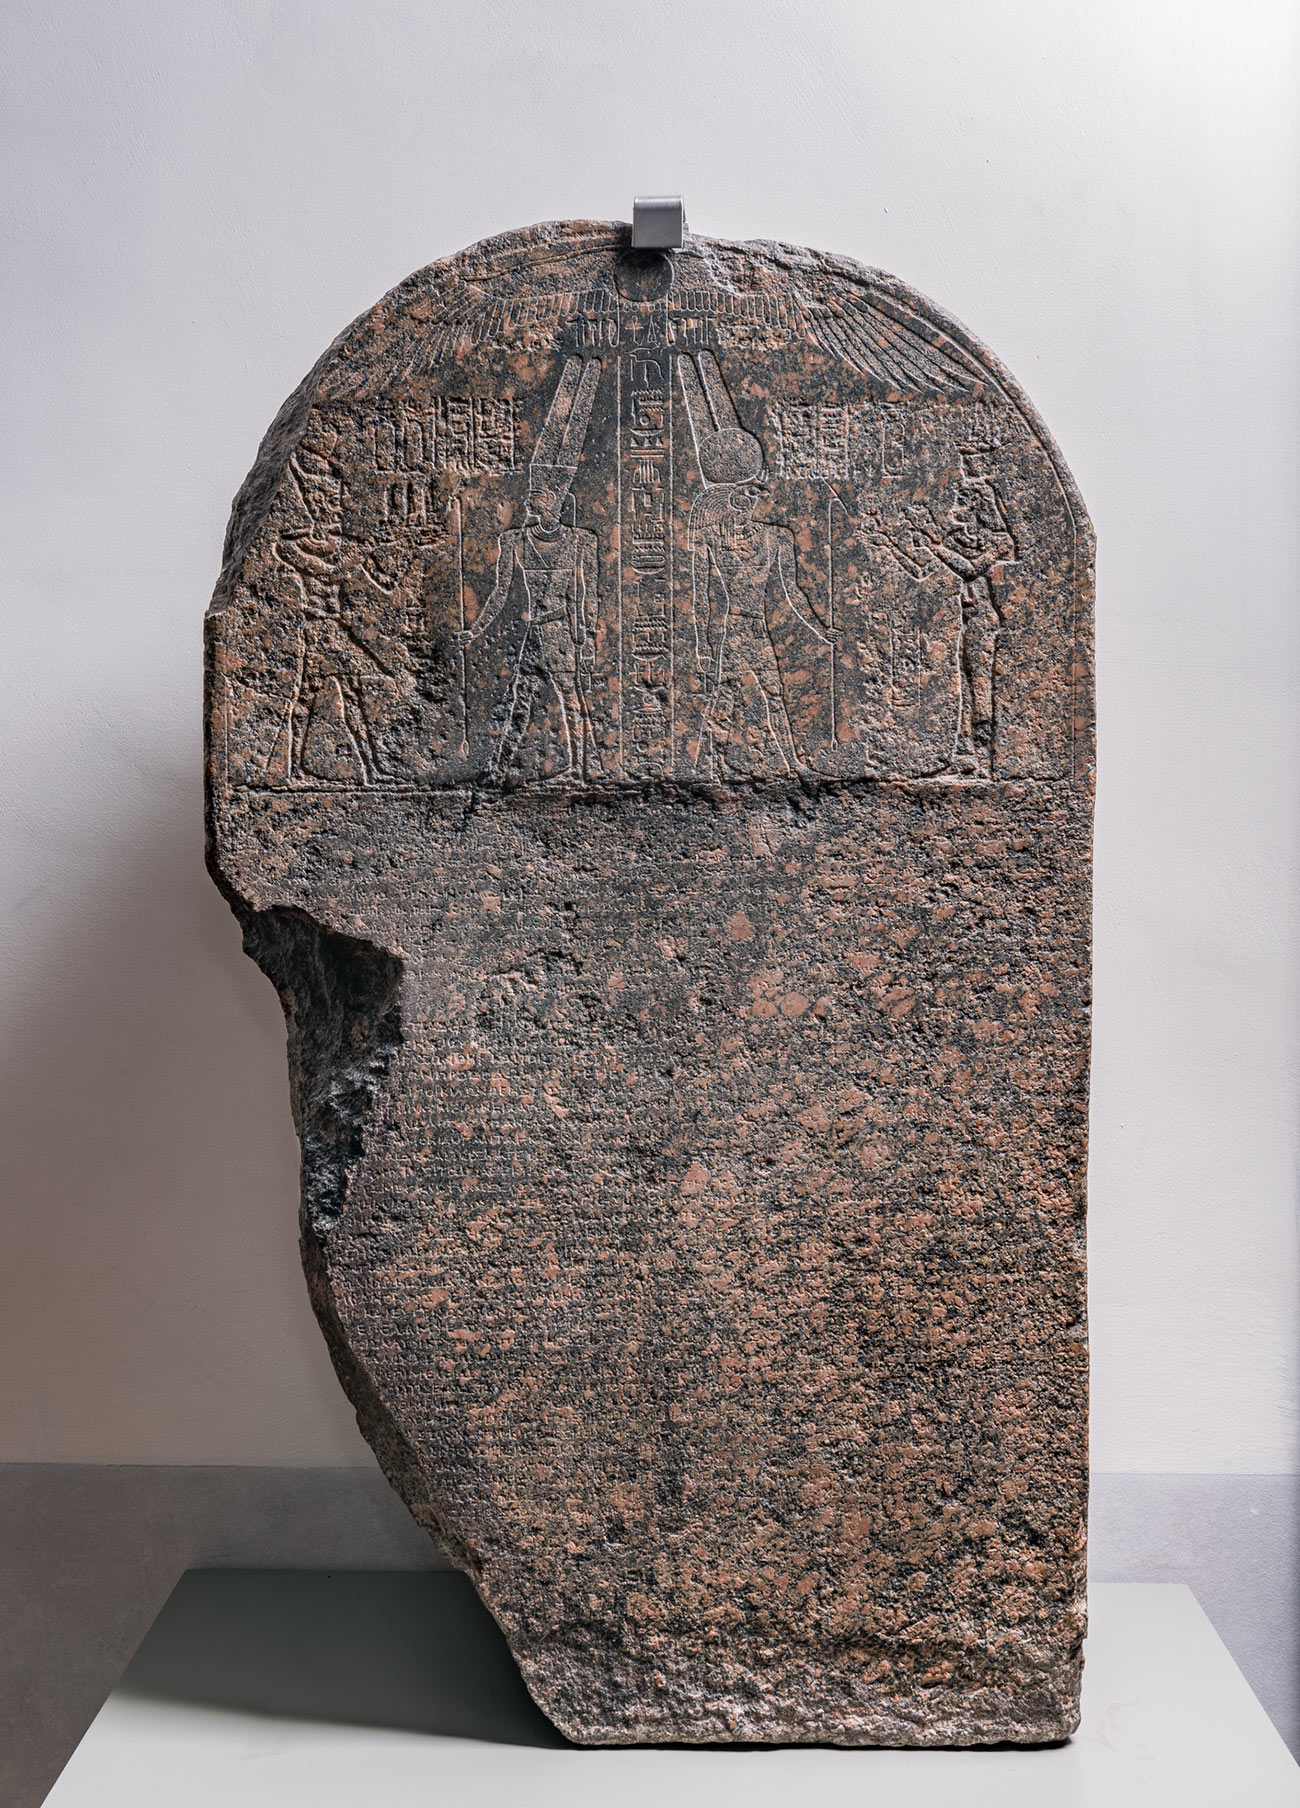 Decree in Honor of Kallimachos, 332–30 B.C., Ptolemaic. Granite, 44 7/8 × 25 11/16 × 11 13/16 in. Torino, Museo Egizio. © Museo Egizio. Featured in the exhibition Beyond the Nile: Egypt and the Classical World